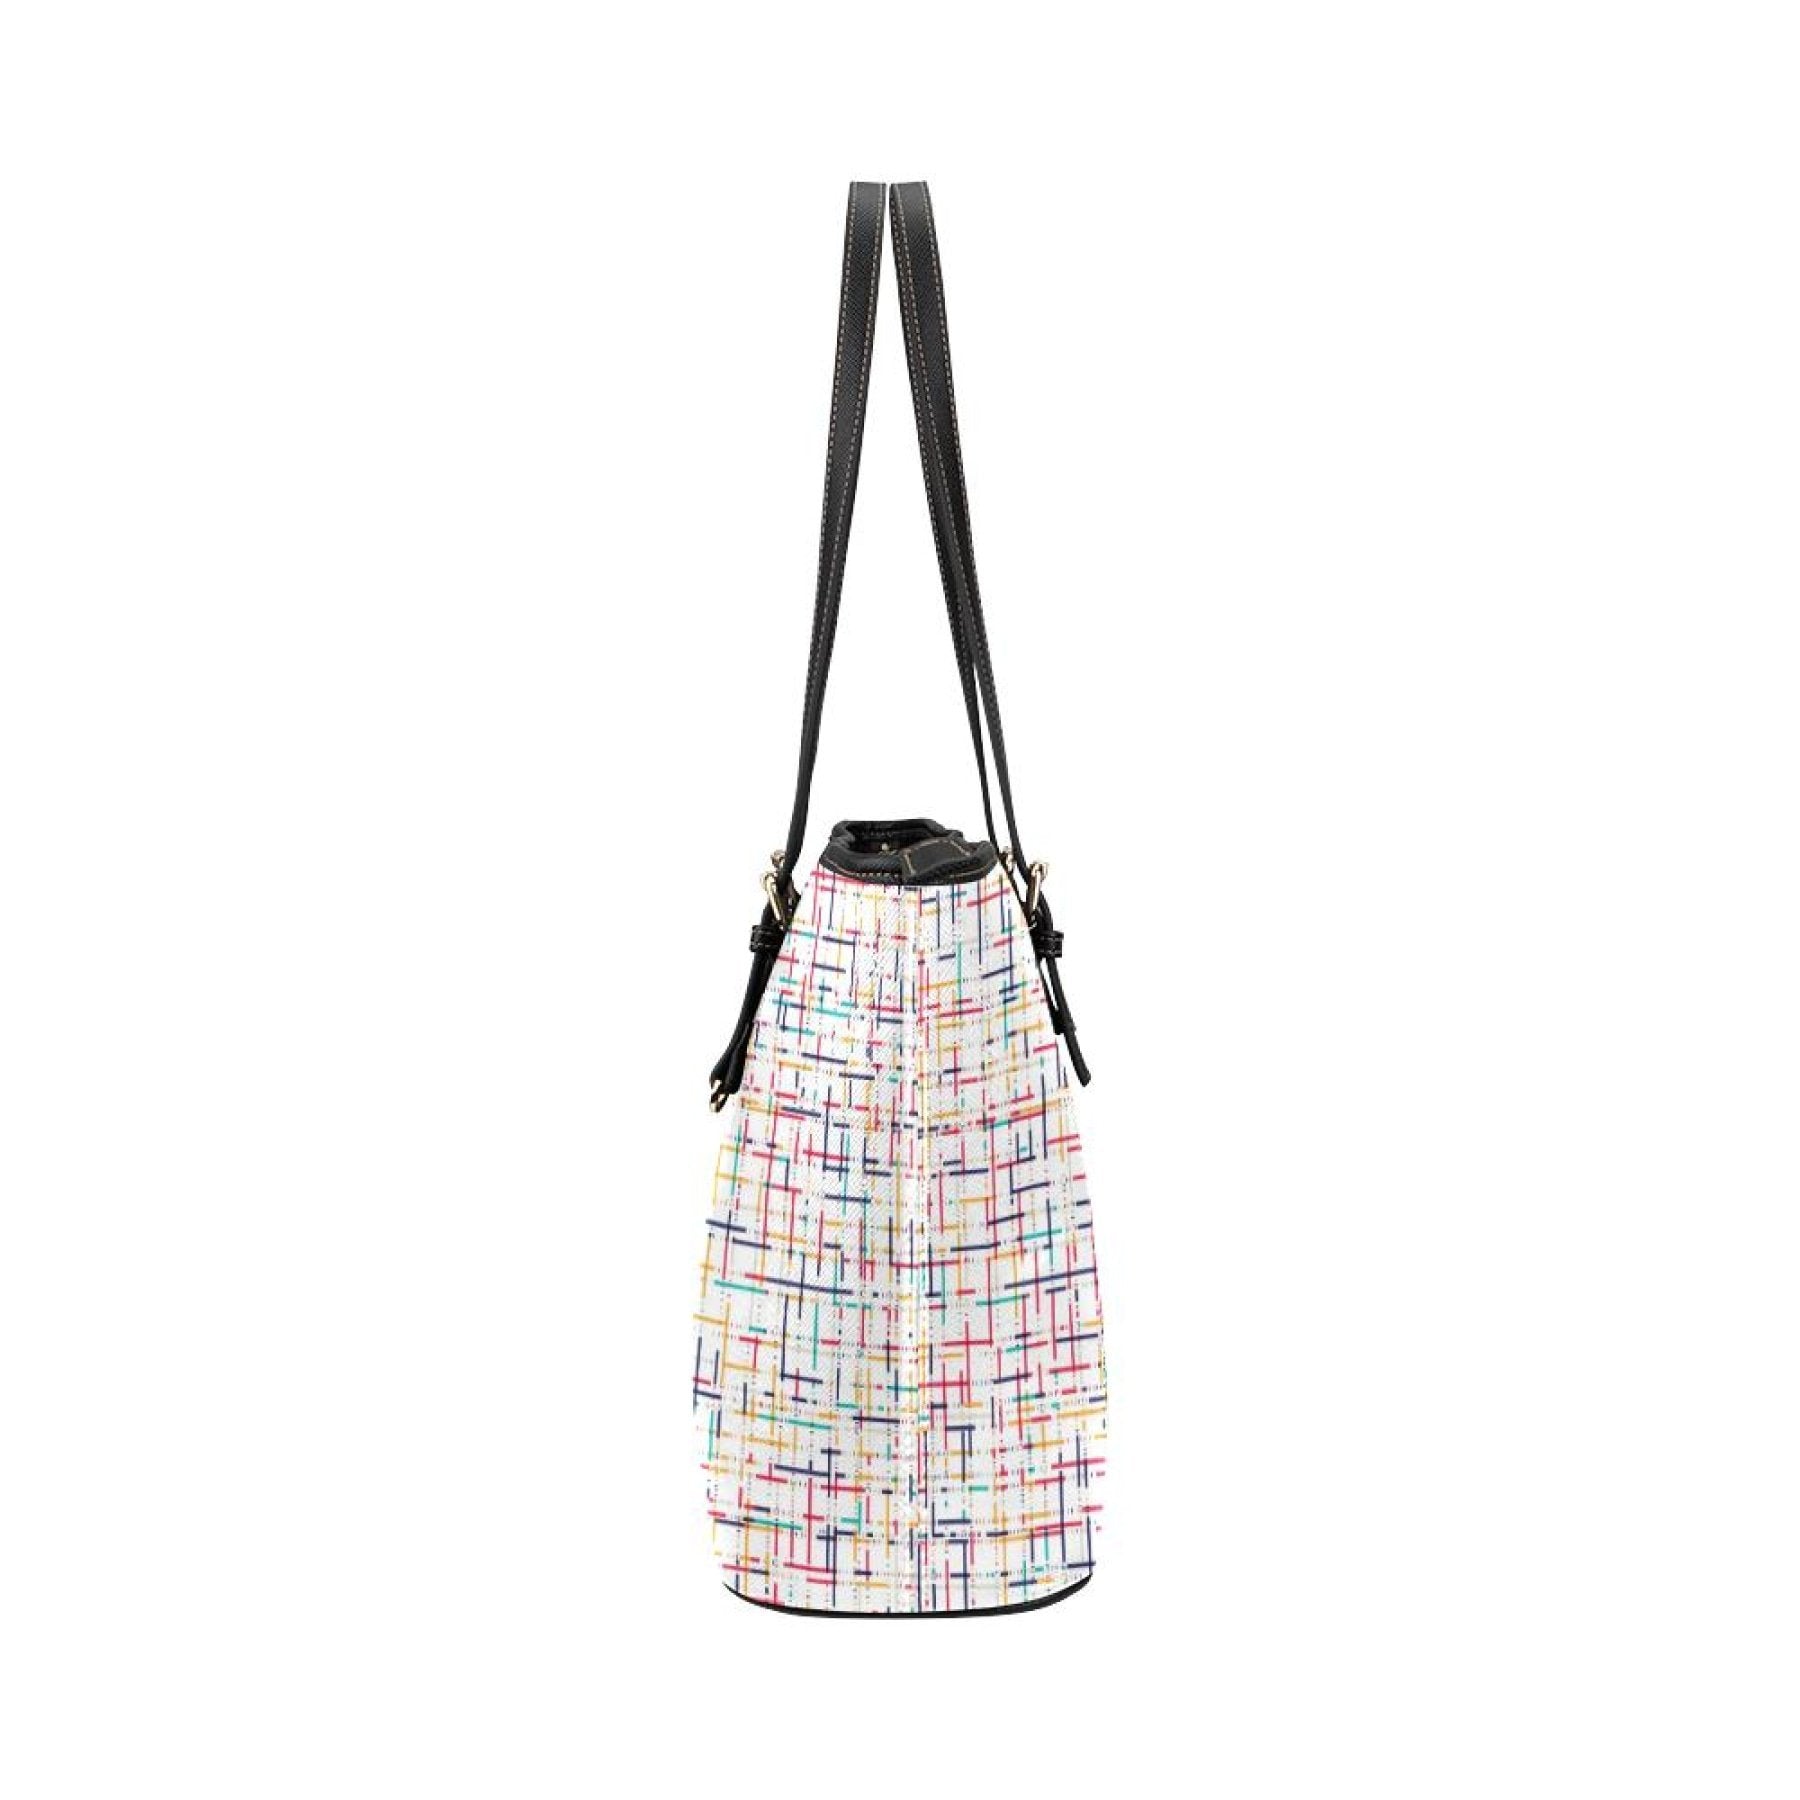 Tote Bags, White Colorful Stripes Style Bag - Ecombran Limited